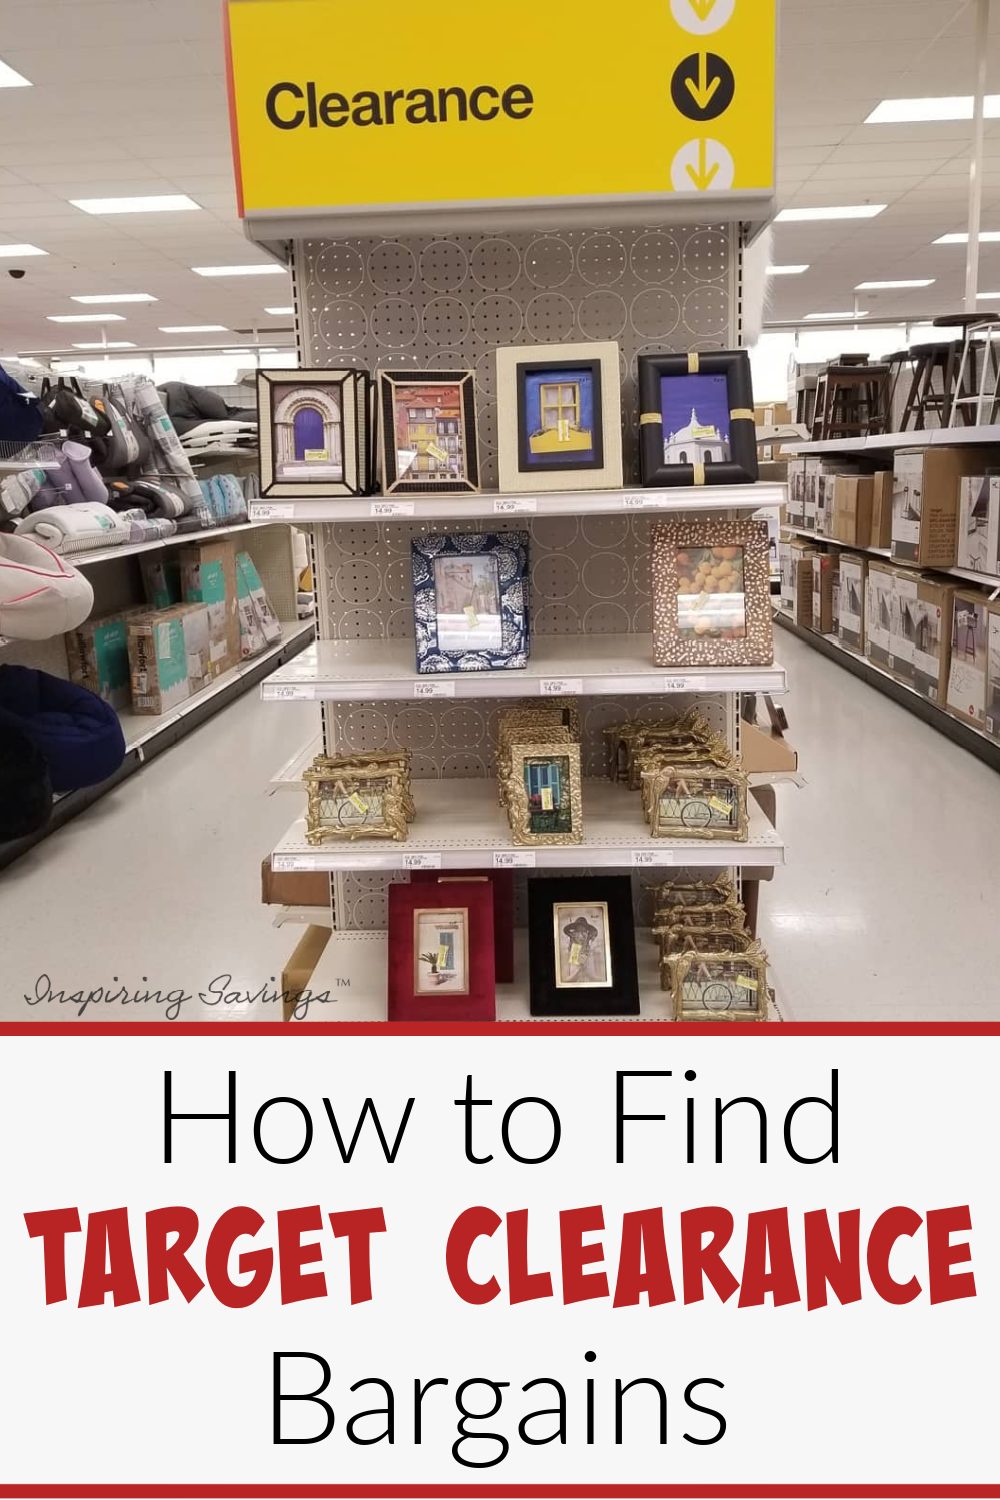 Target sale: Clearance prices extra 20% off to clear inventory